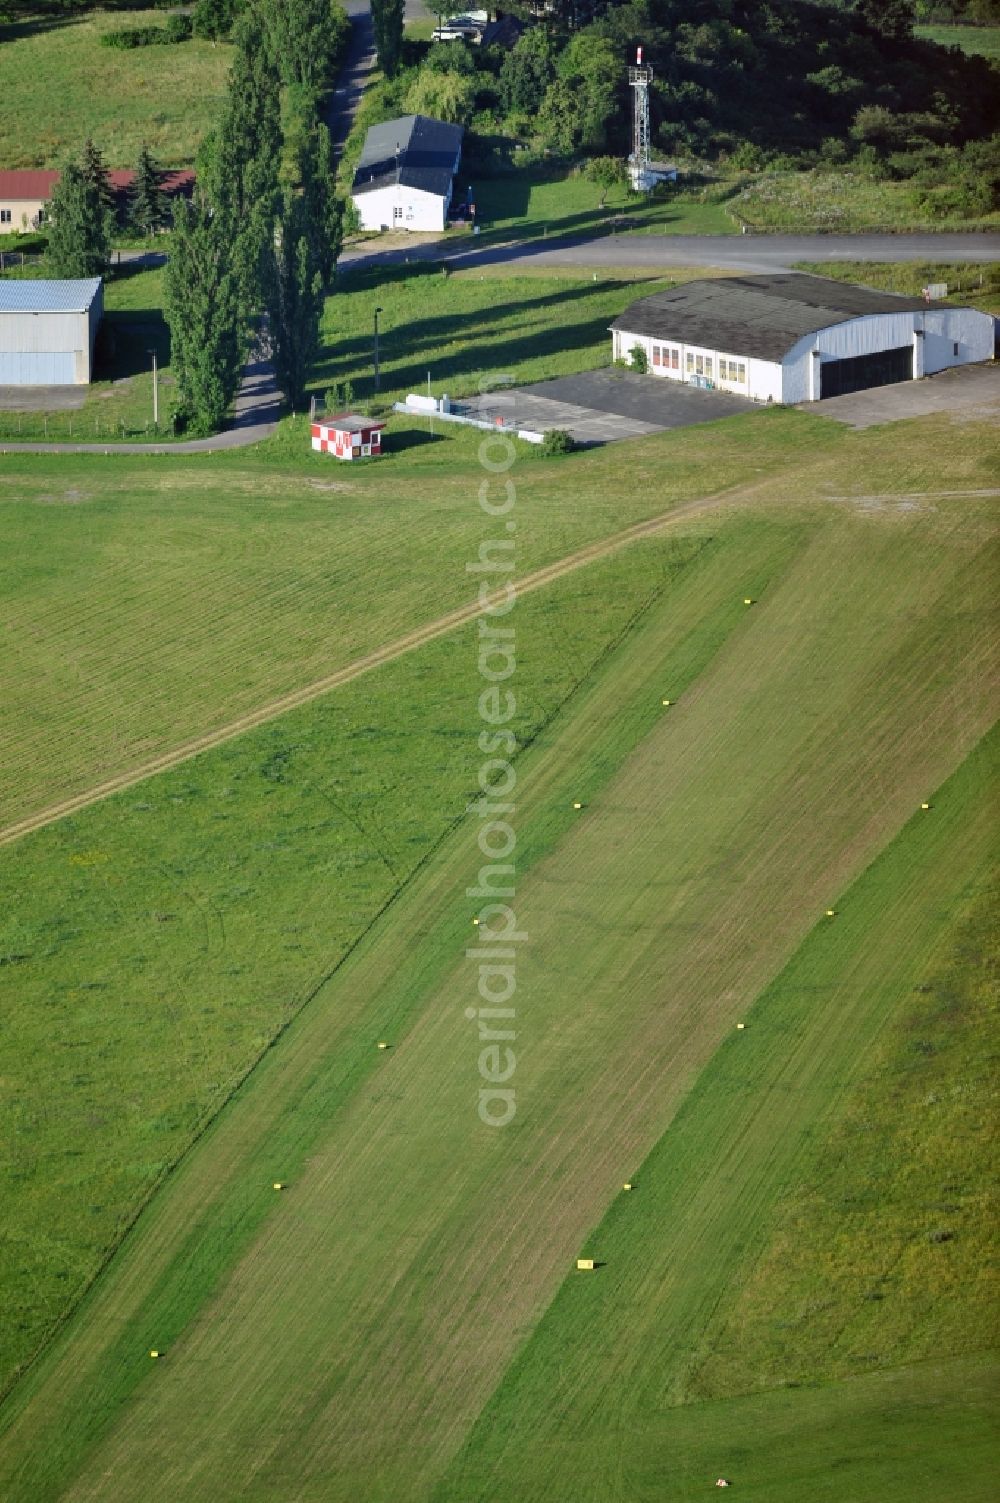 Aerial photograph Laucha - View at the traffic and sports airfield Laucha in Saxony-Anhalt. Airfield operator is the city of Laucha